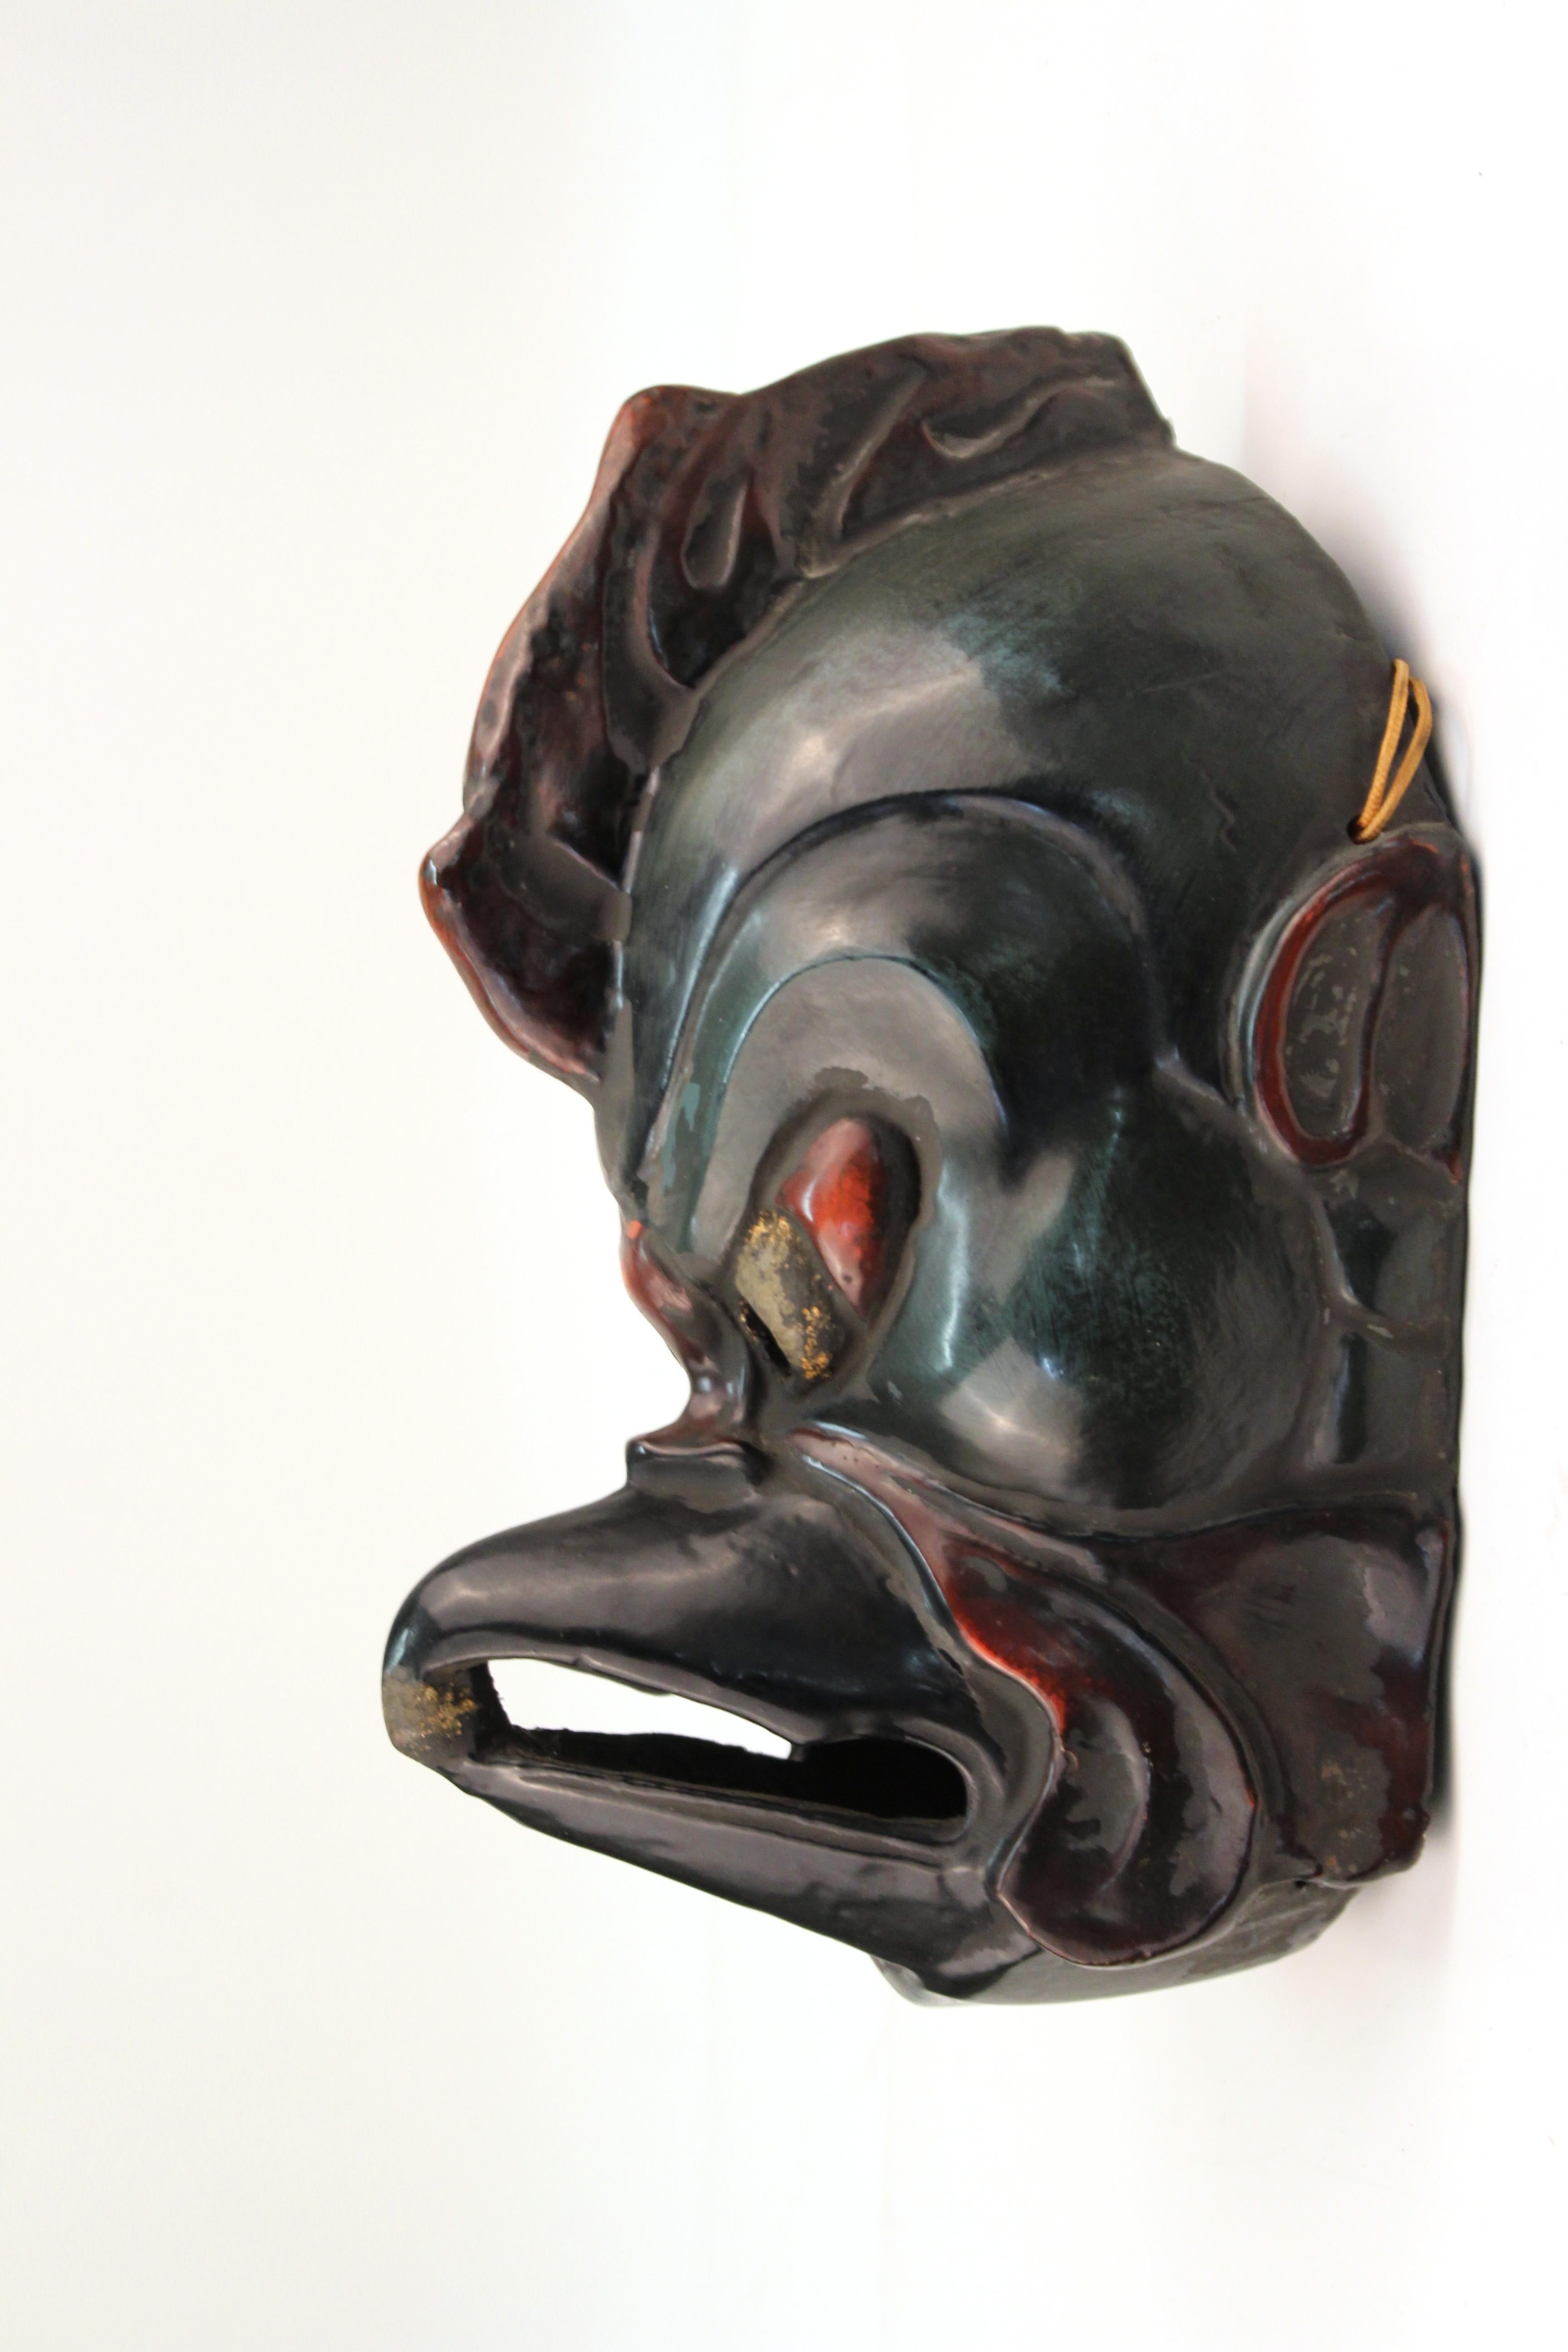 Japanese hand carved and painted wood mask of Tengu, the legendary Japanese folk religion creature. Traditionally depicted as a human-bird of prey hybrid, this mask is in great vintage condition and dates to circa 1929.